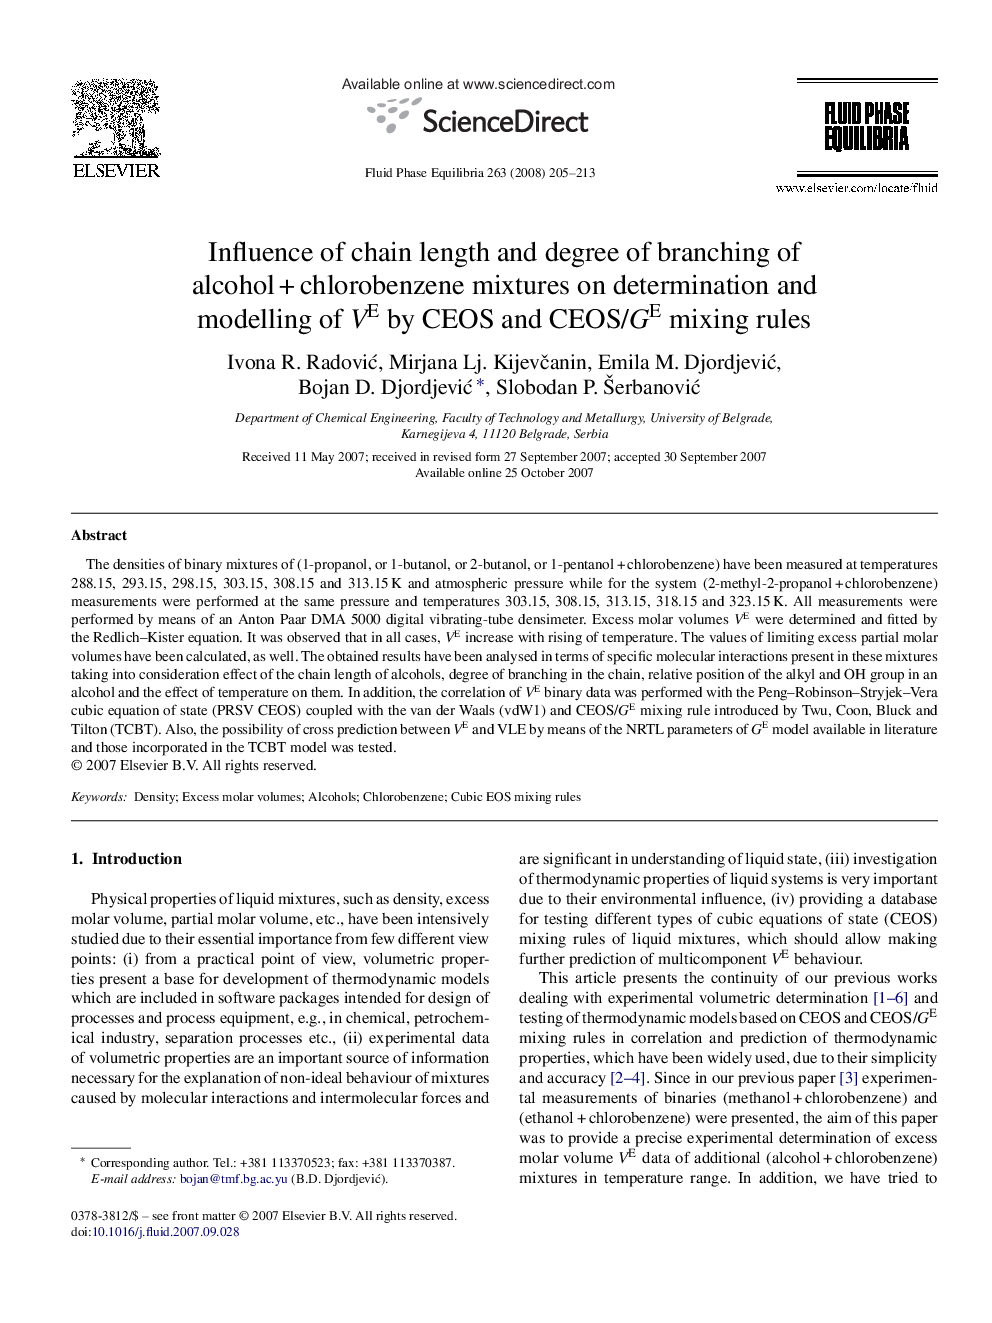 Influence of chain length and degree of branching of alcohol + chlorobenzene mixtures on determination and modelling of VE by CEOS and CEOS/GE mixing rules